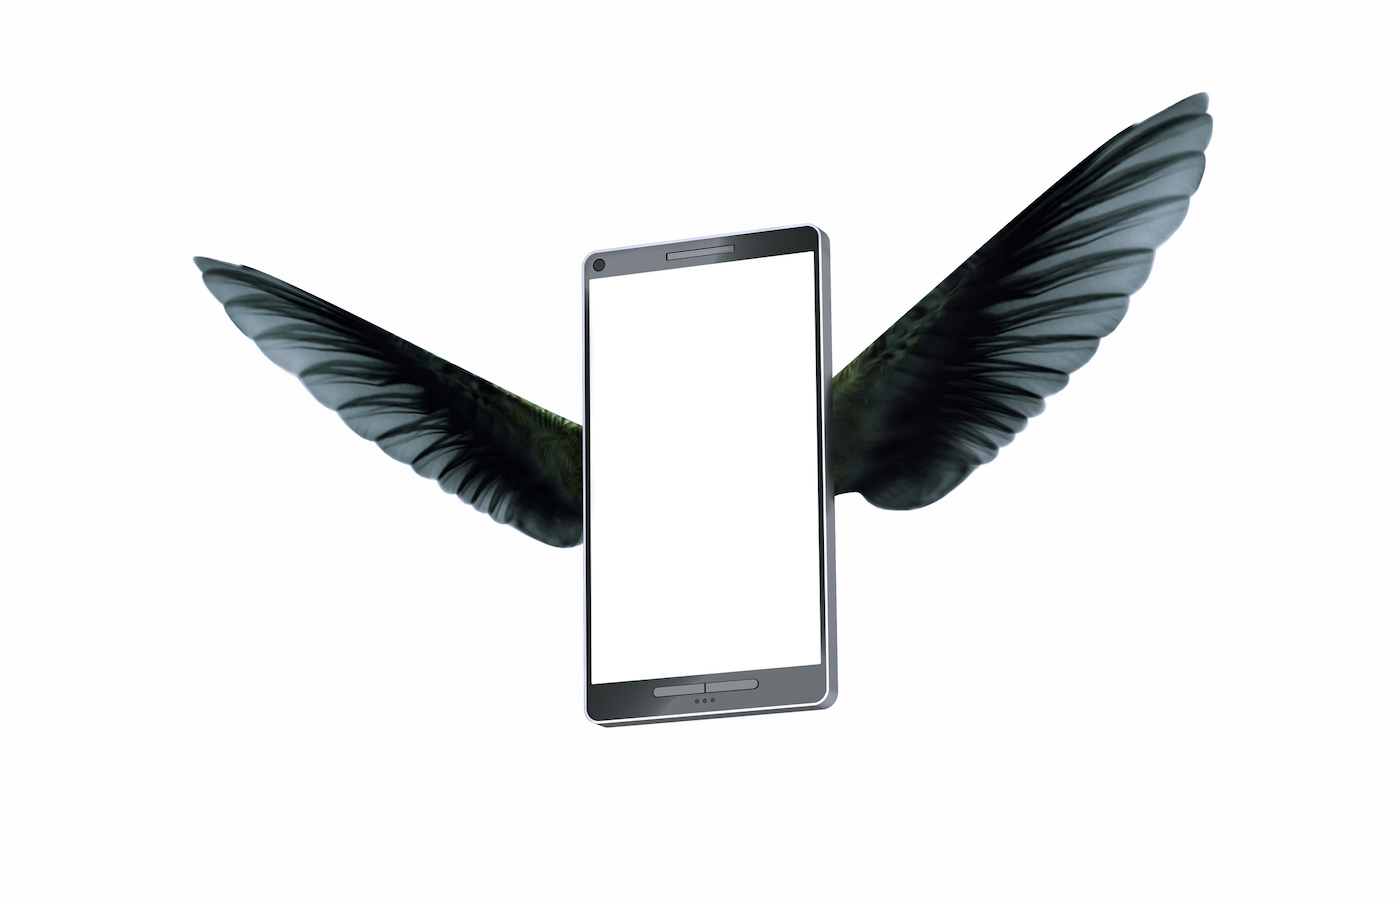 Smart phone with wings, flying against white background, as a concept for sending messages or information, digital Illustration